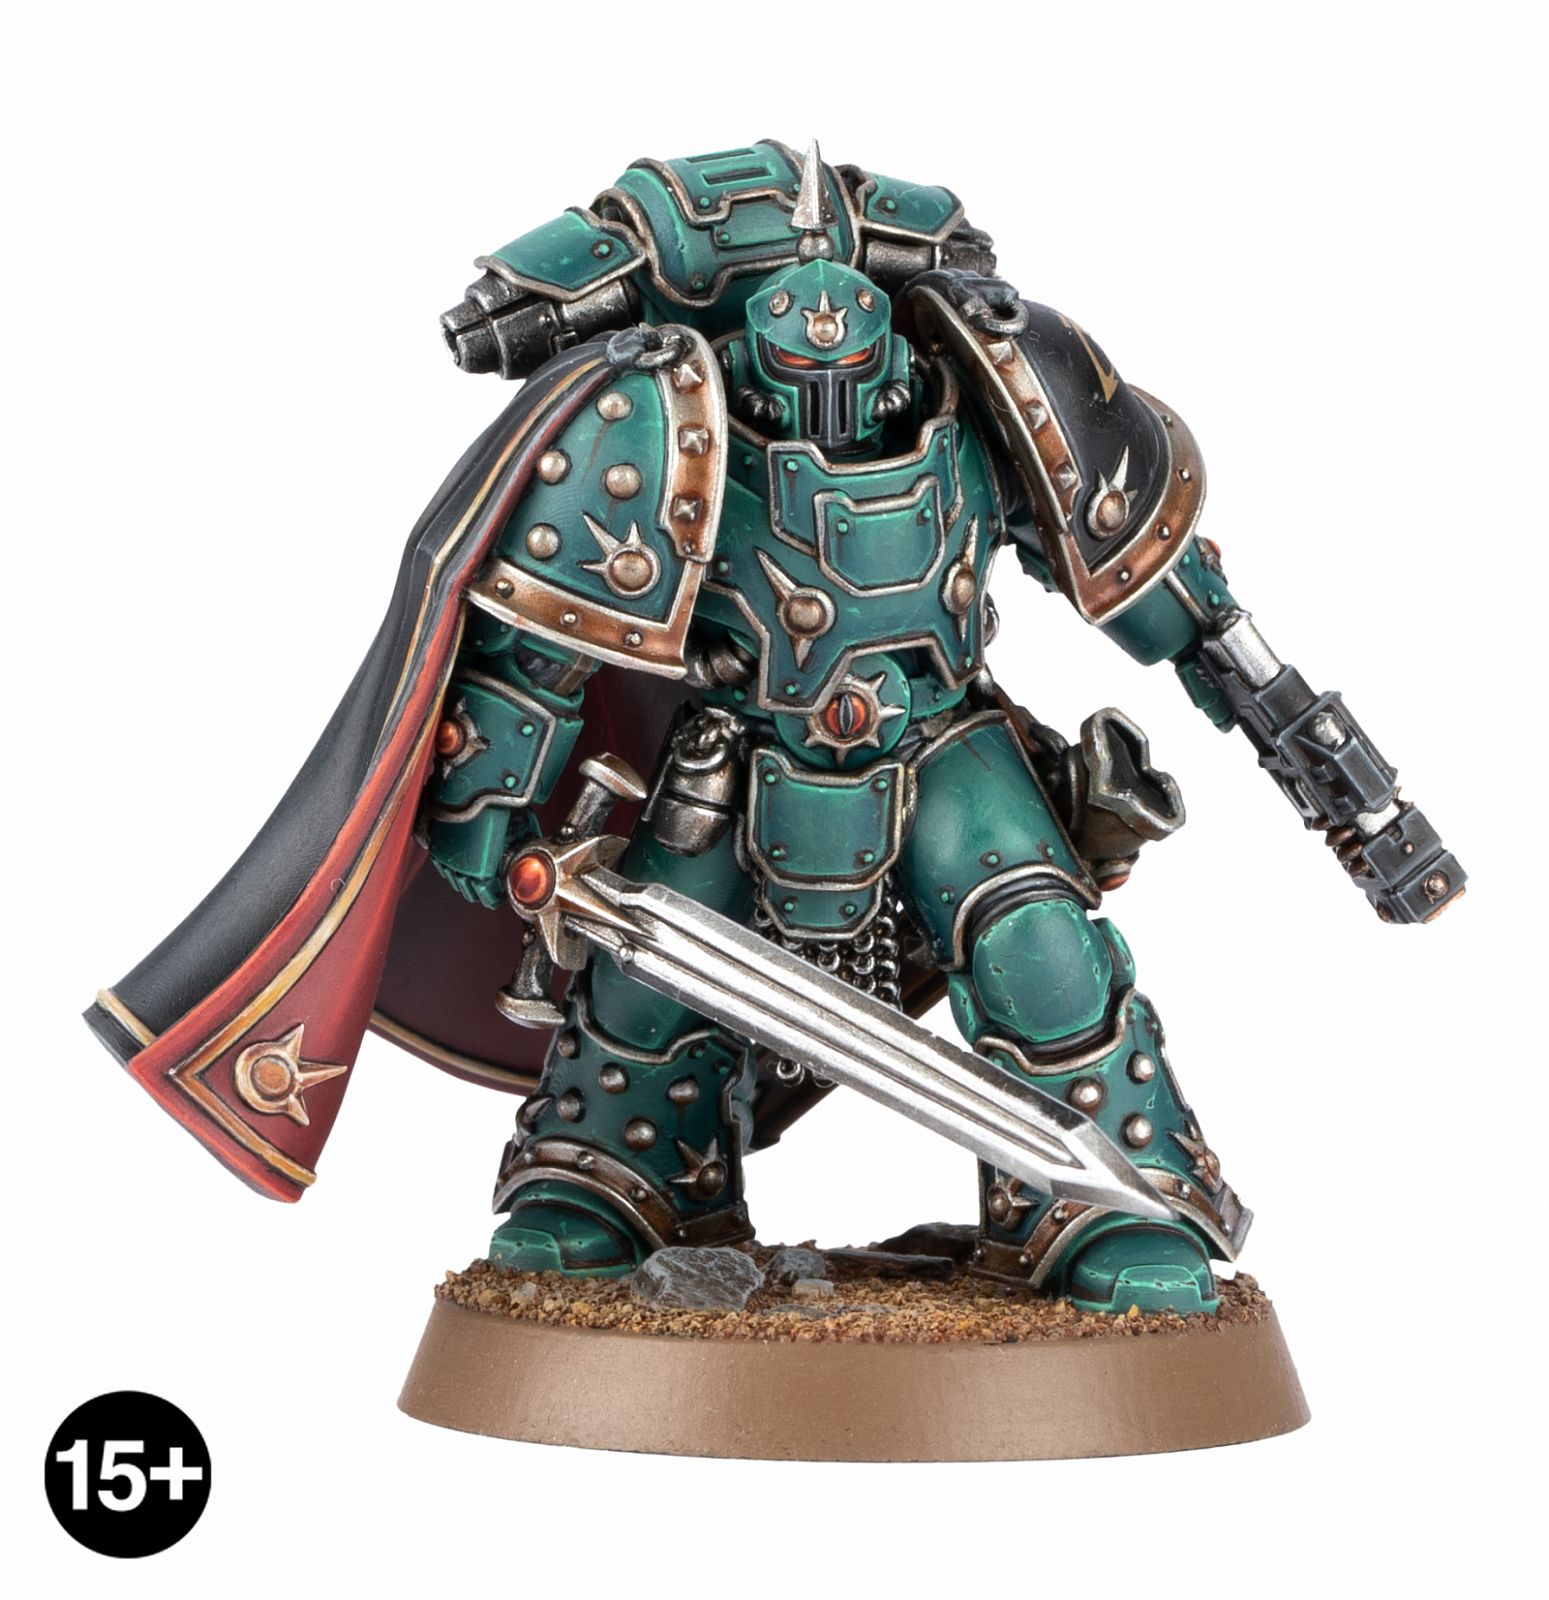 Forge World - The Horus Heresy, all miniatures